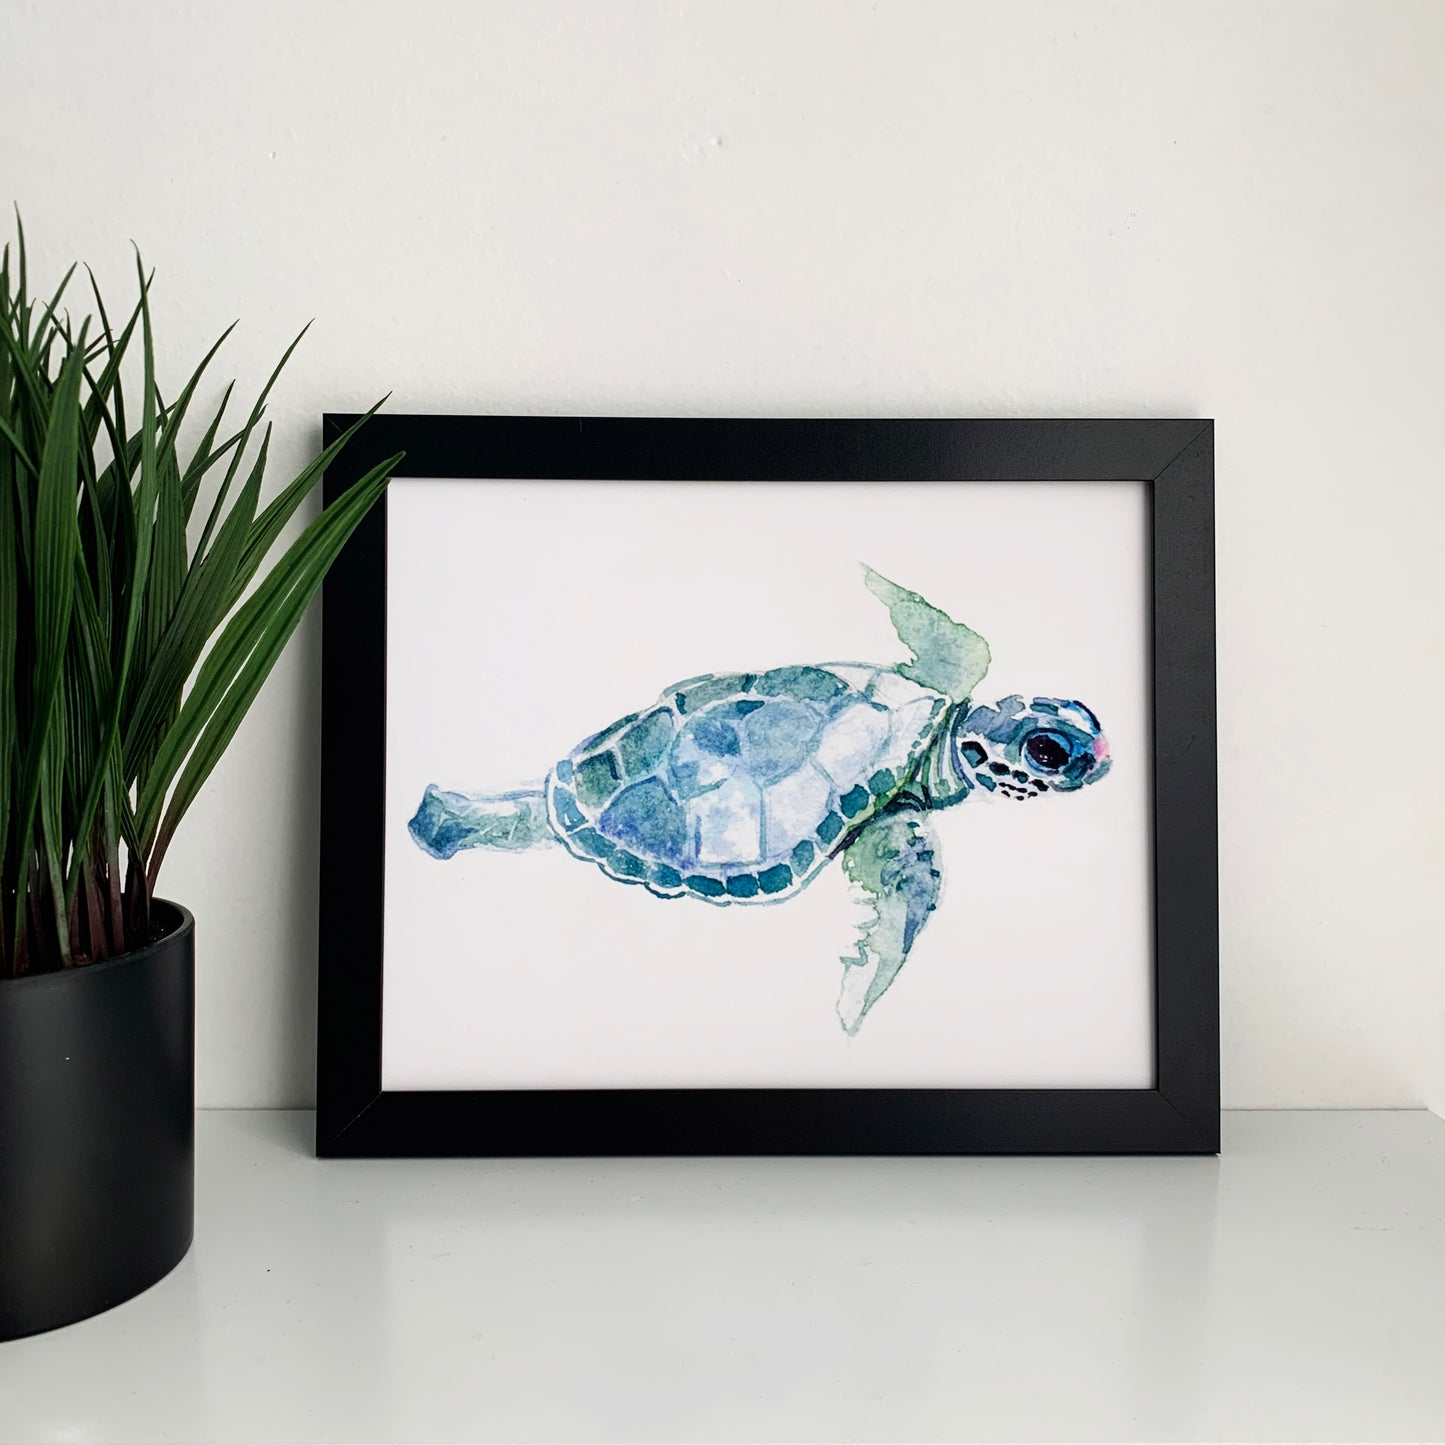 Baby turtle watercolor print in frame for gifts, home or office